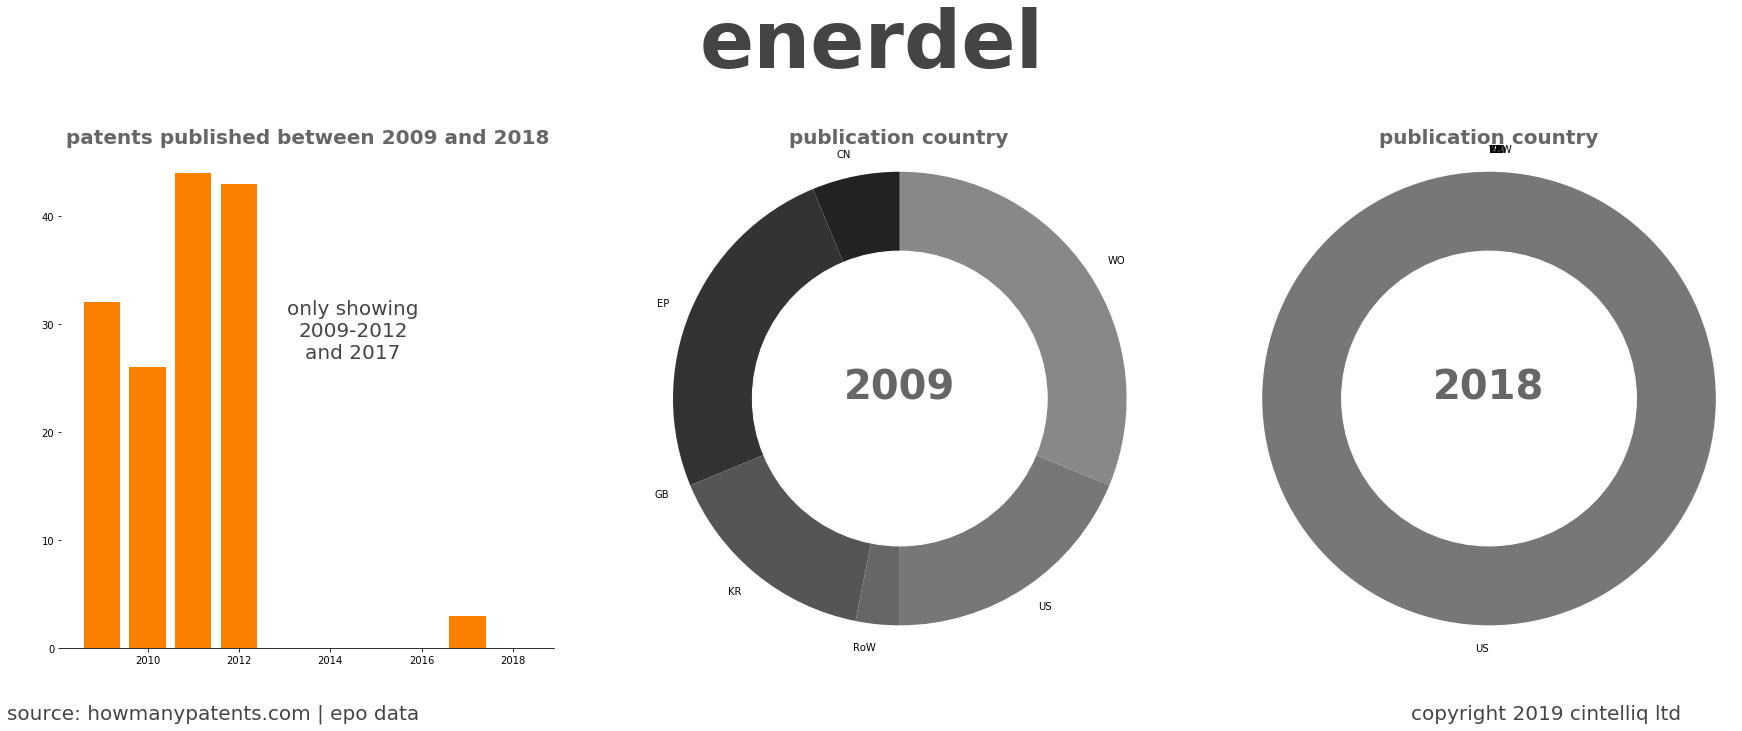 summary of patents for Enerdel